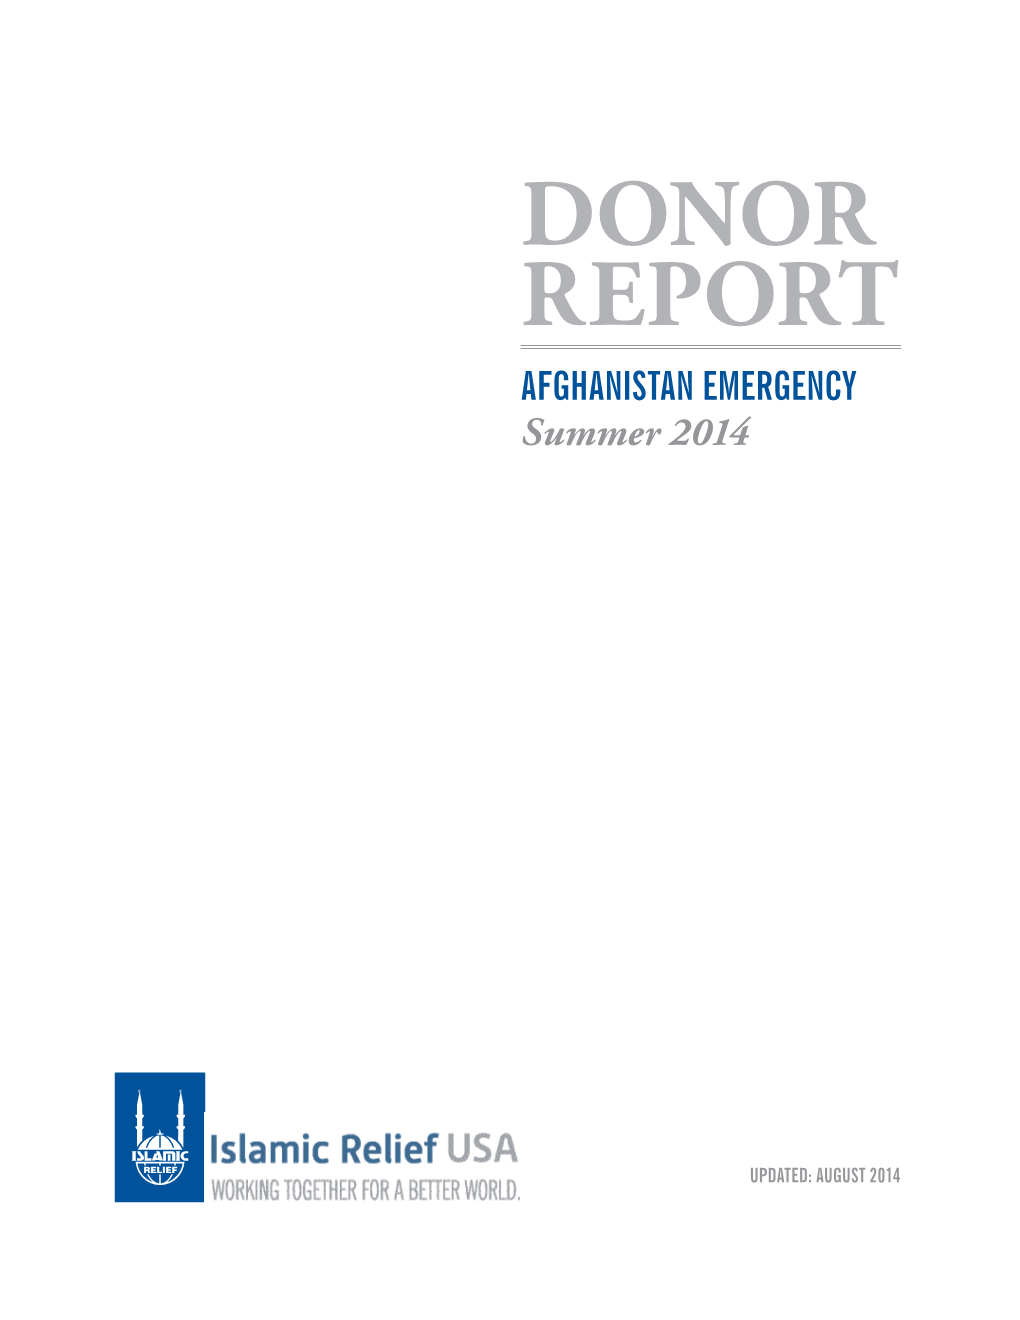 DONOR REPORT Afghanistan Emergency Summer 2014